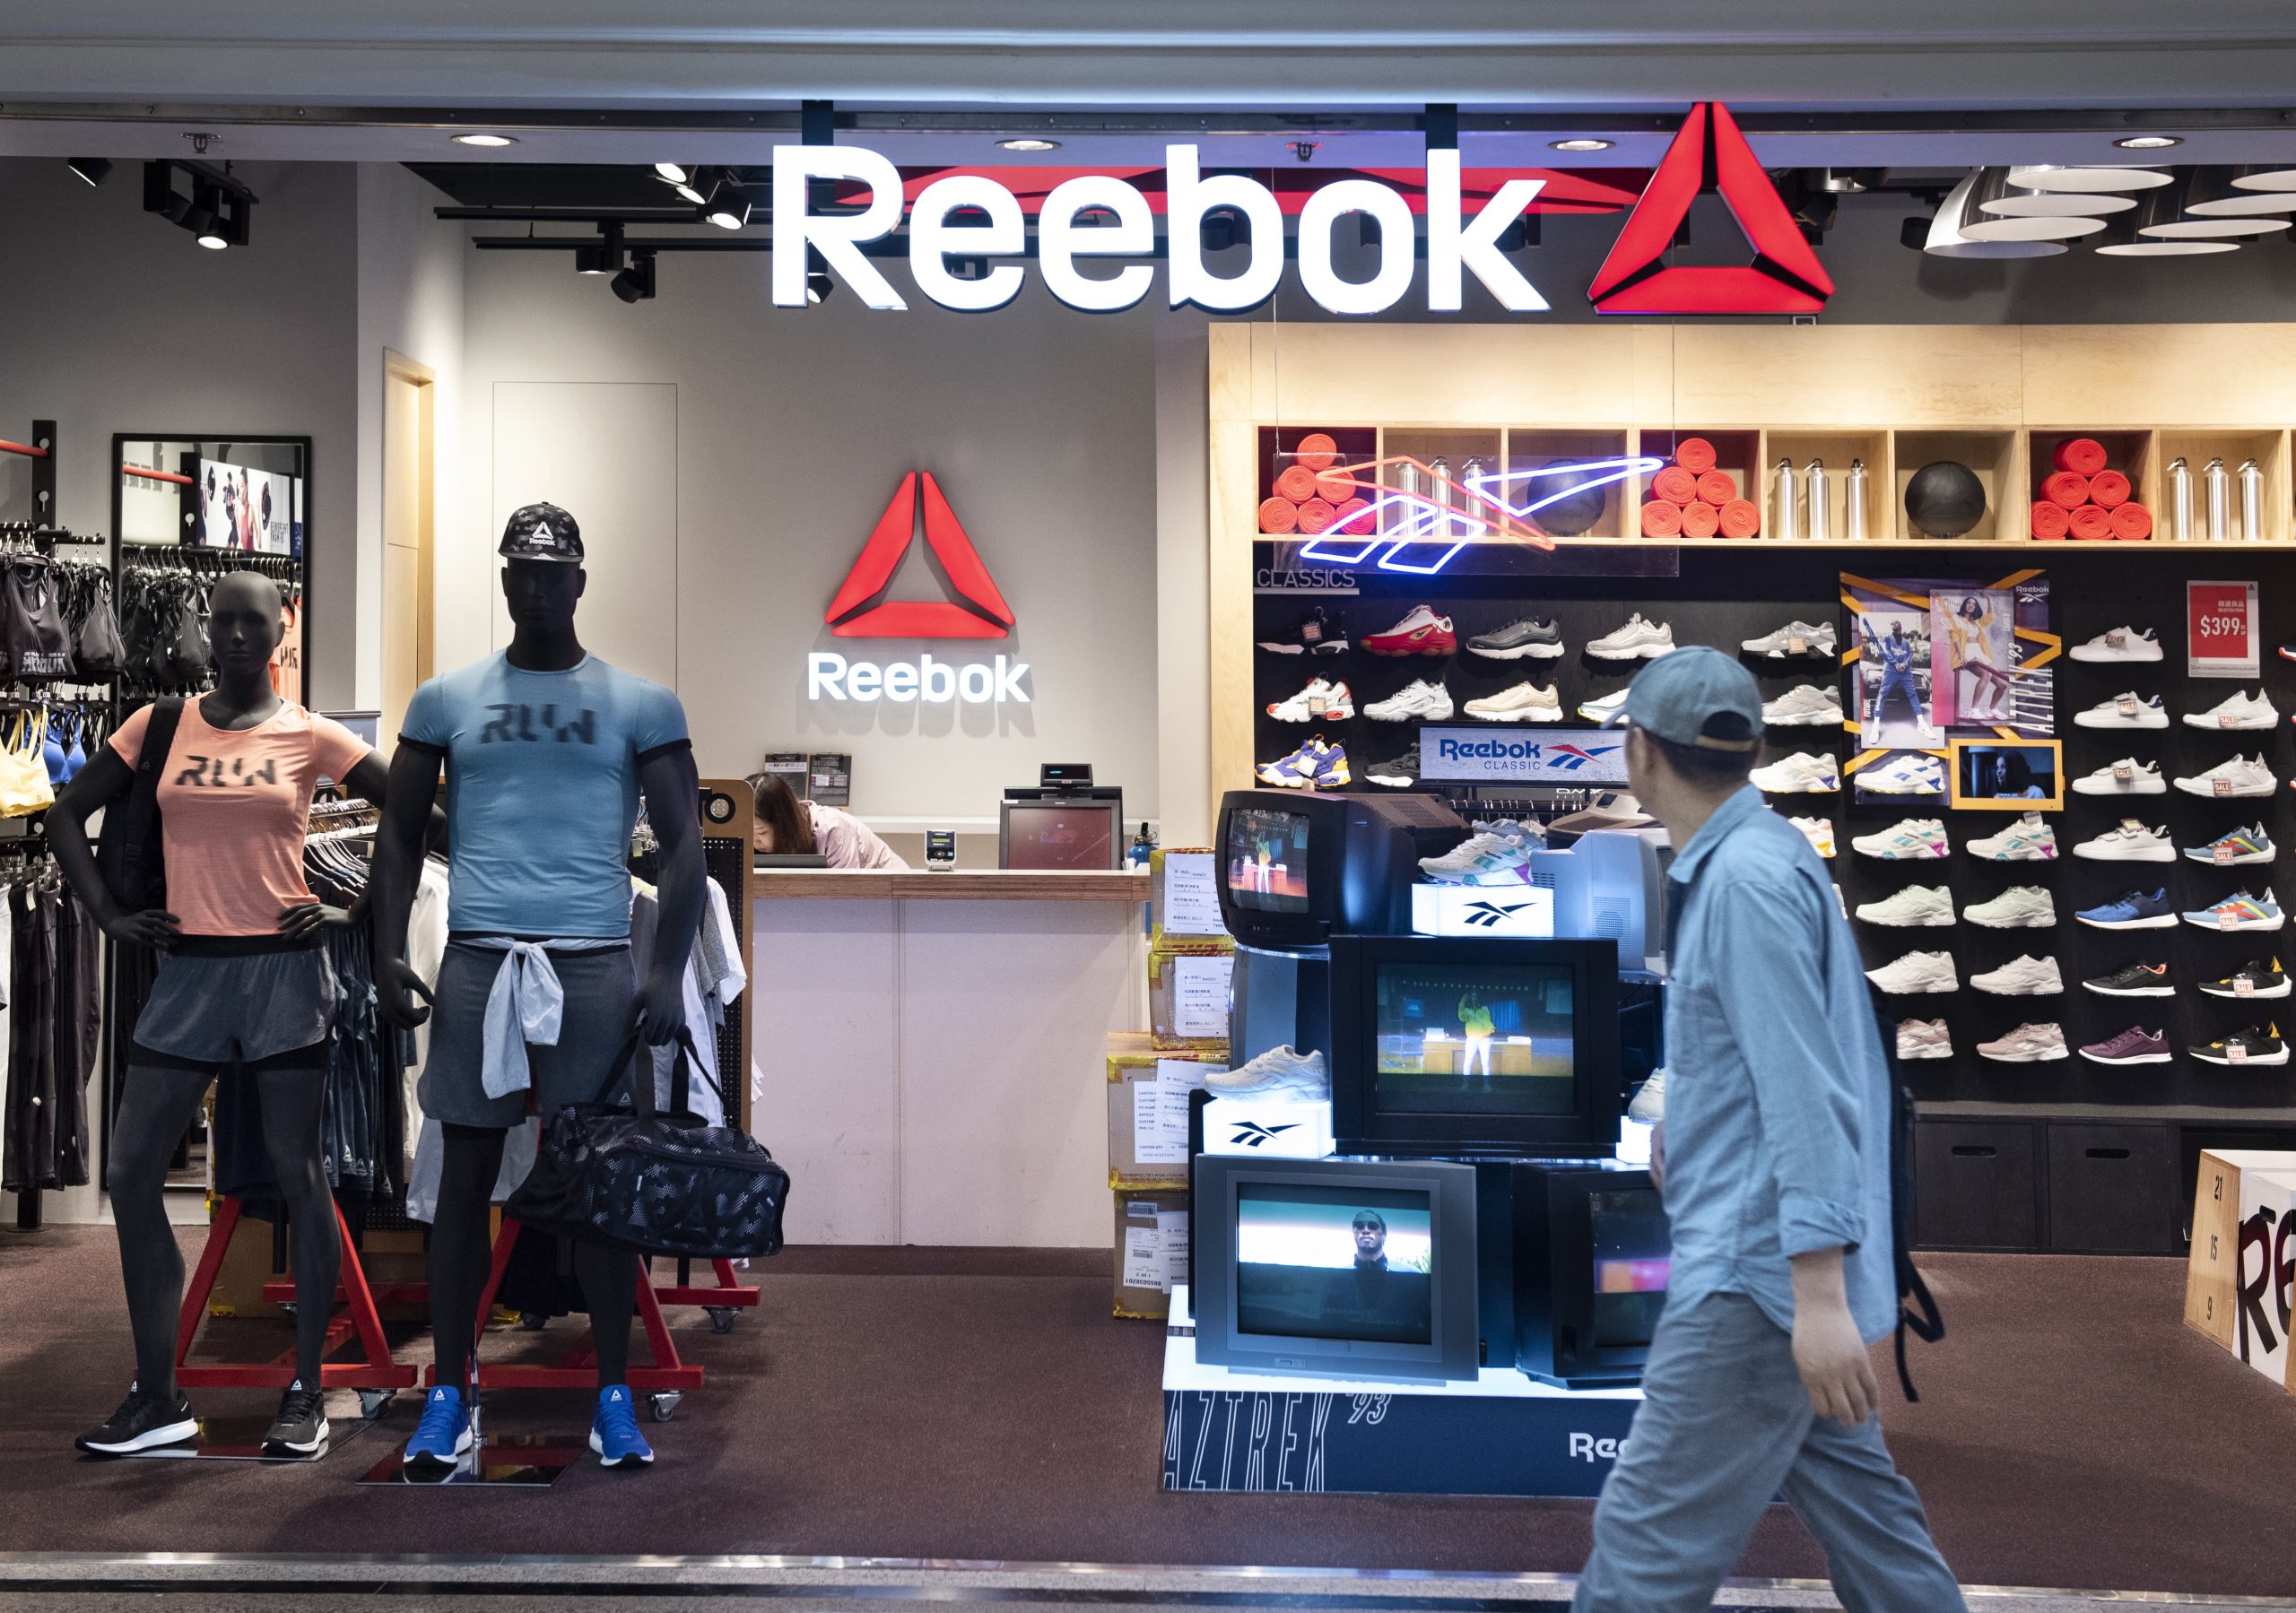 Adidas strikes deal to sell off struggling Reebok to Authentic Brands Group